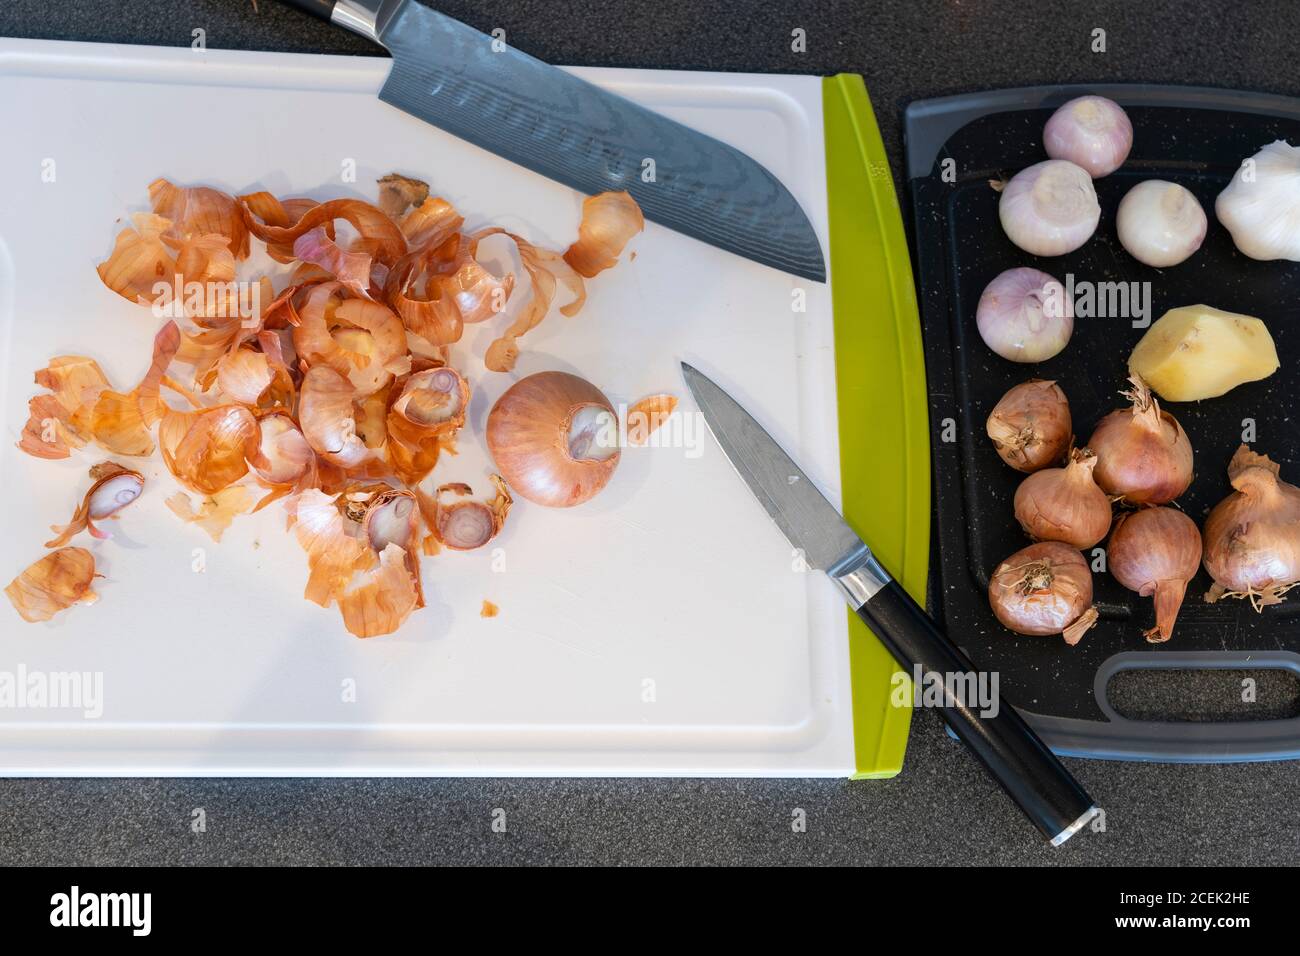 Peeled shallot onions with discarded onion skins on a white plastic chopping board with Japanese knives Stock Photo